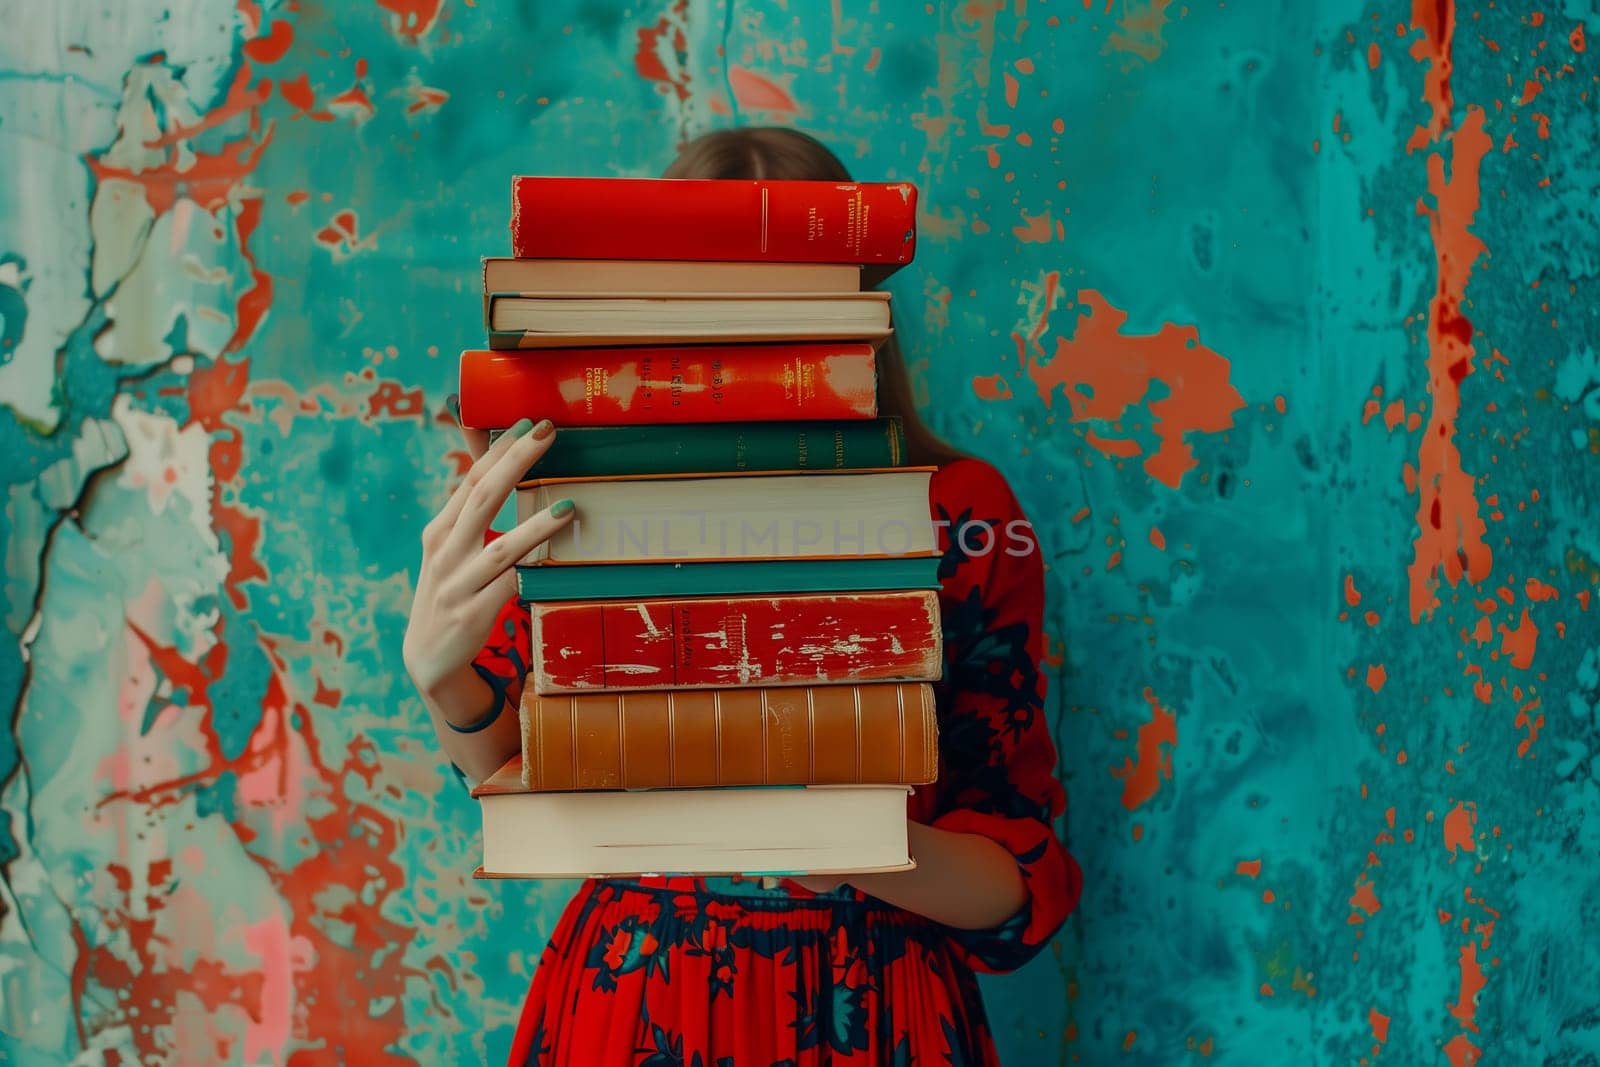 A woman is obscuring her face with a stack of books in shades of aqua and magenta, showcasing a blend of blue and green tints on the textile covers